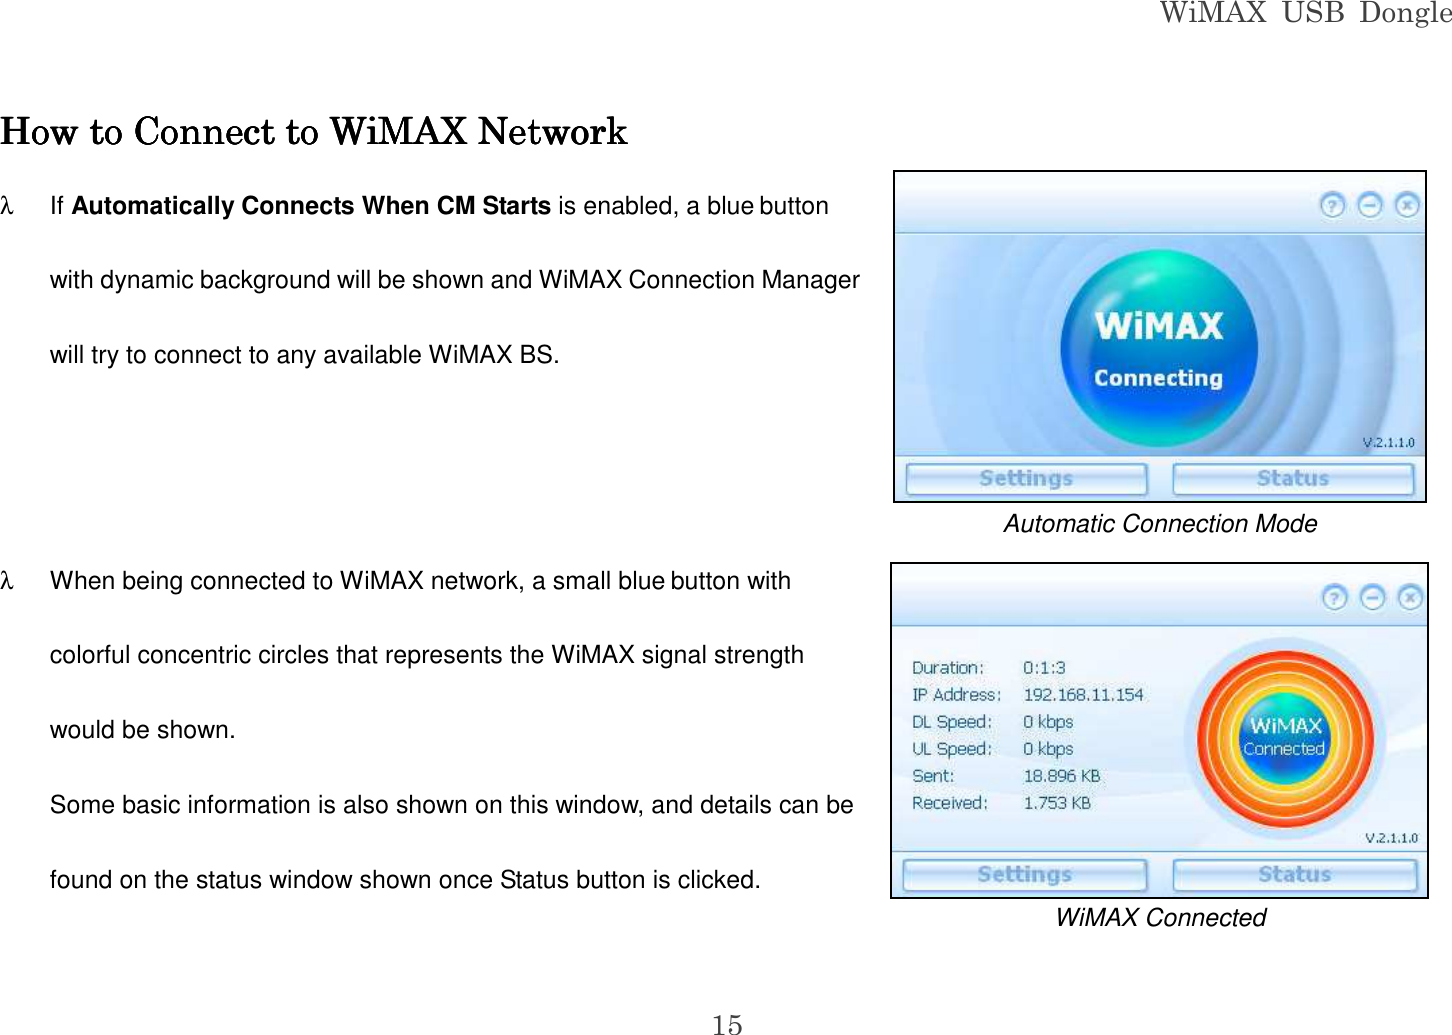 WiMAX  USB  Dongle  15 How to Connect to WiMAX NetworkHow to Connect to WiMAX NetworkHow to Connect to WiMAX NetworkHow to Connect to WiMAX Network    λ  If Automatically Connects When CM Starts is enabled, a blue button with dynamic background will be shown and WiMAX Connection Manager will try to connect to any available WiMAX BS.   λ  When being connected to WiMAX network, a small blue button with colorful concentric circles that represents the WiMAX signal strength would be shown. Some basic information is also shown on this window, and details can be found on the status window shown once Status button is clicked.  Automatic Connection Mode  WiMAX Connected 